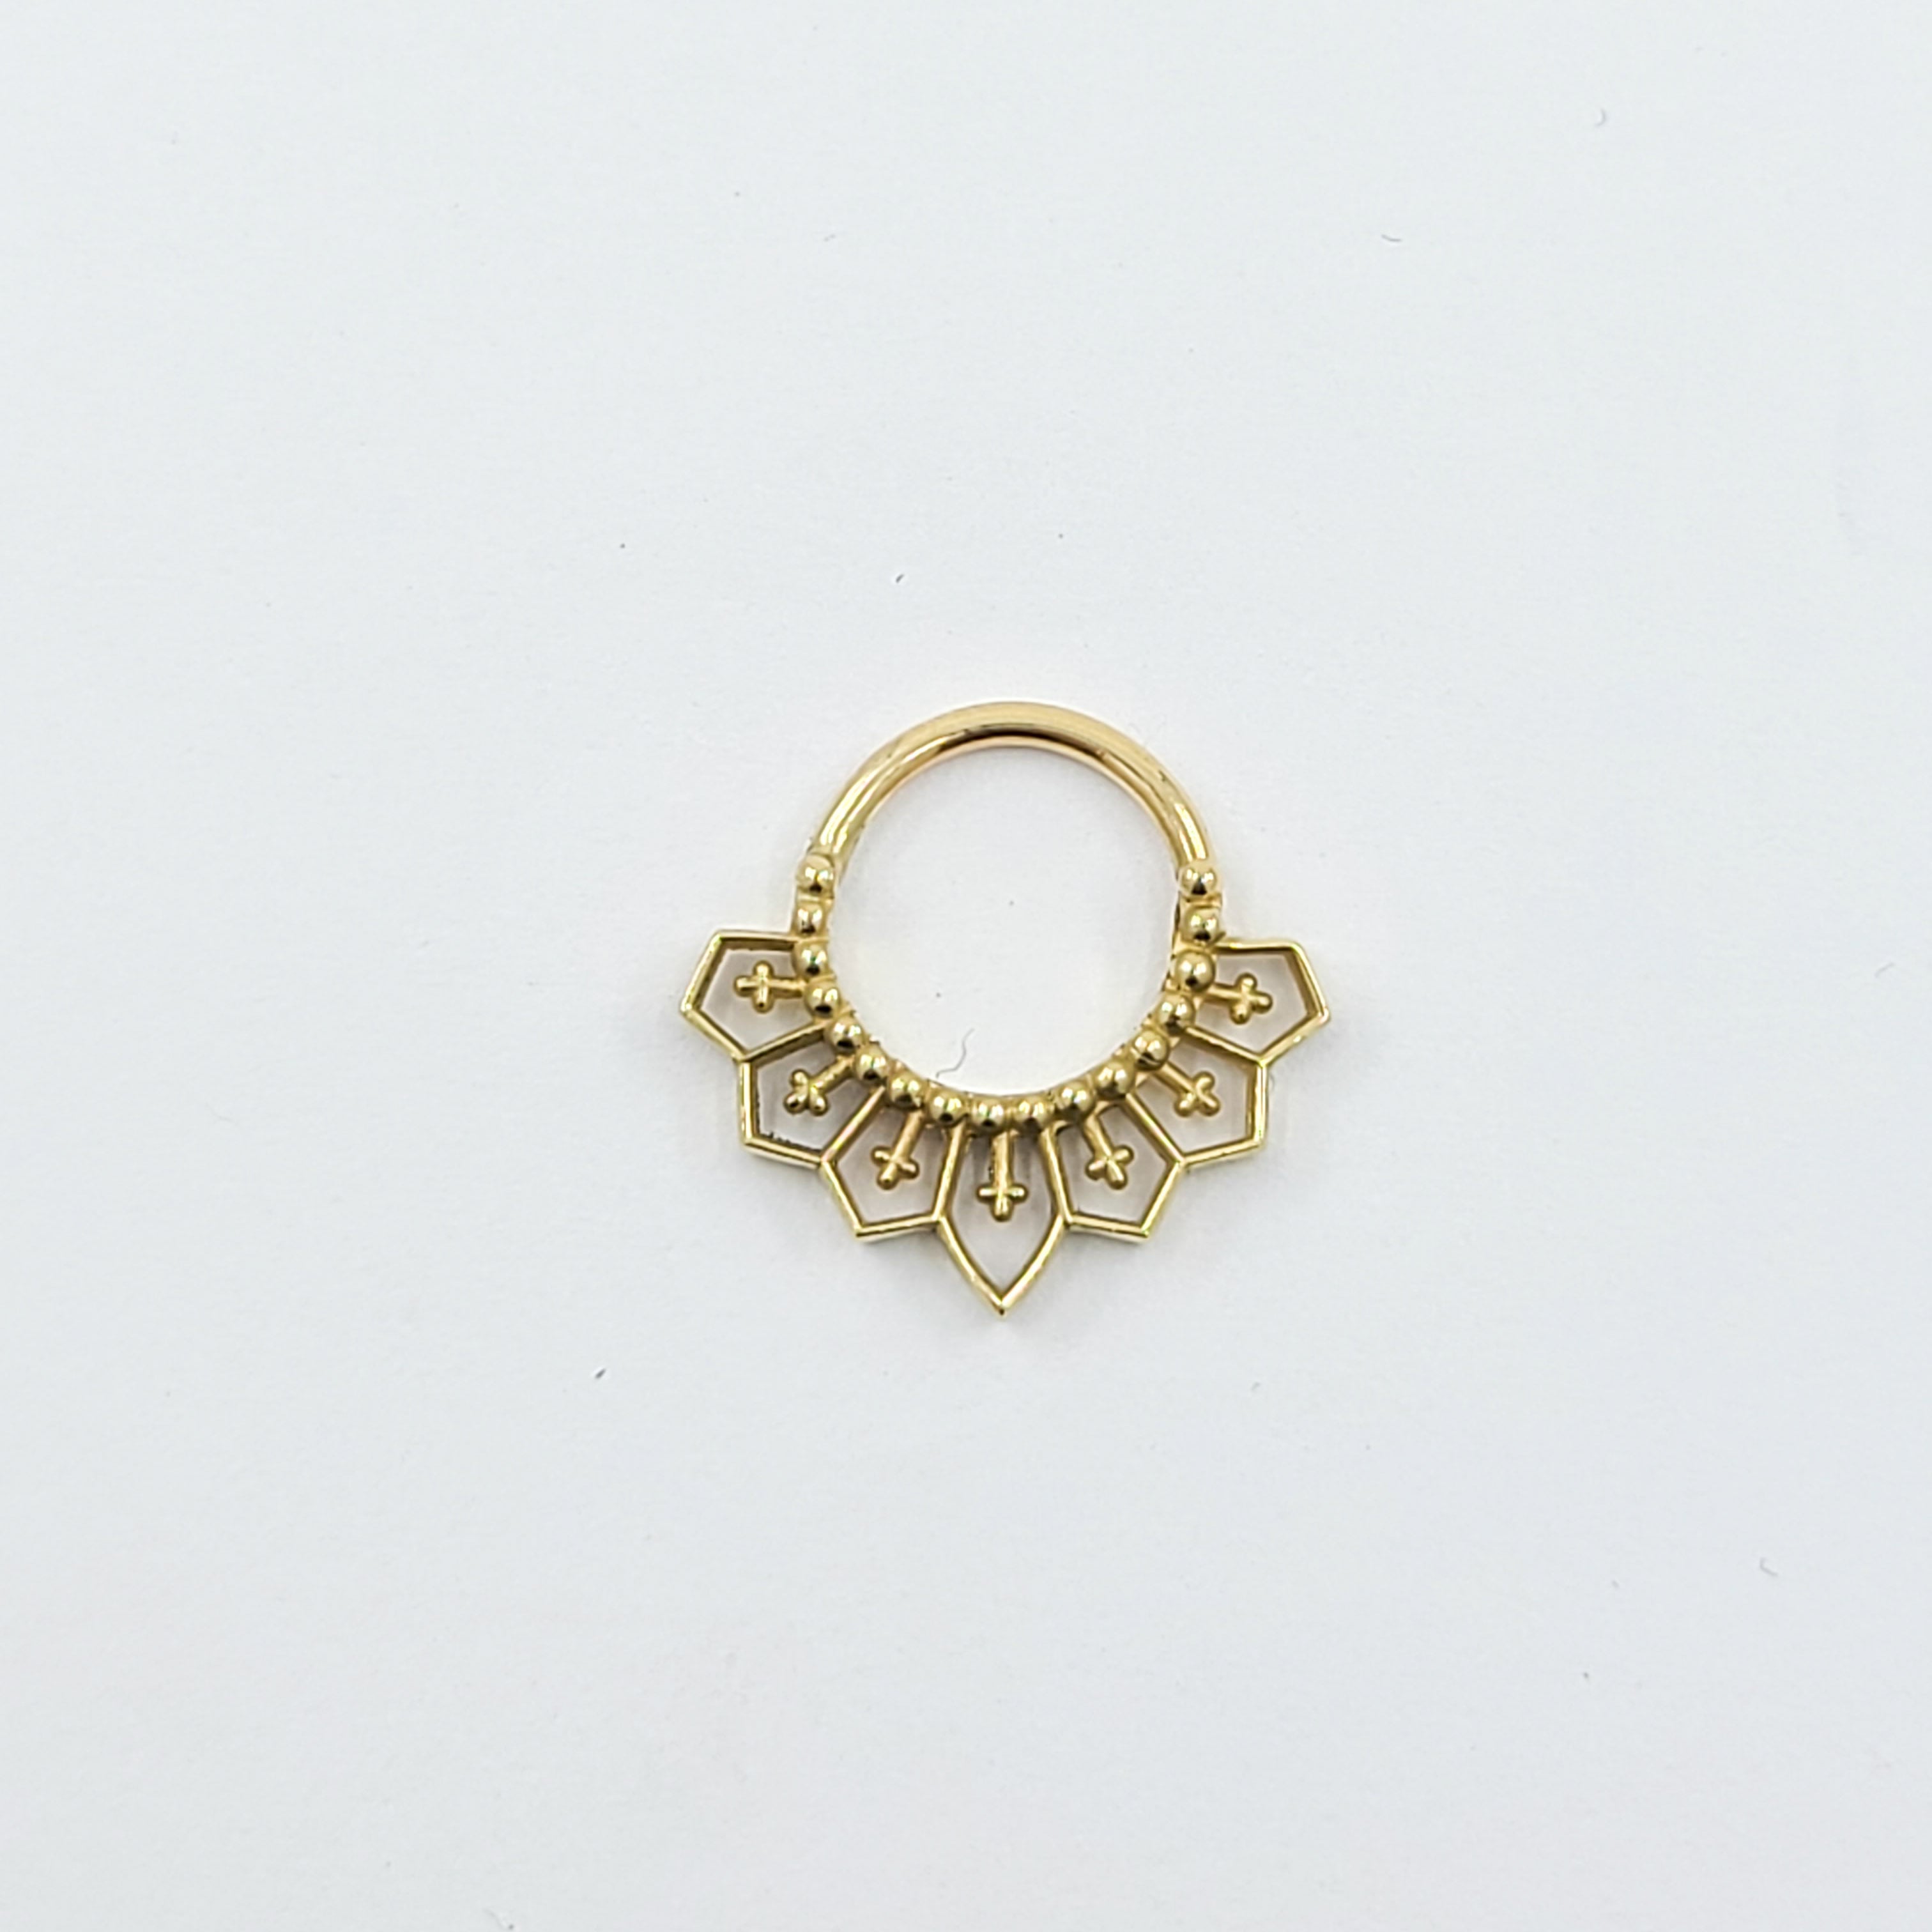 10K - 14K Solid Gold Gothic Lace Septum, Inverted Cross Nose Ring